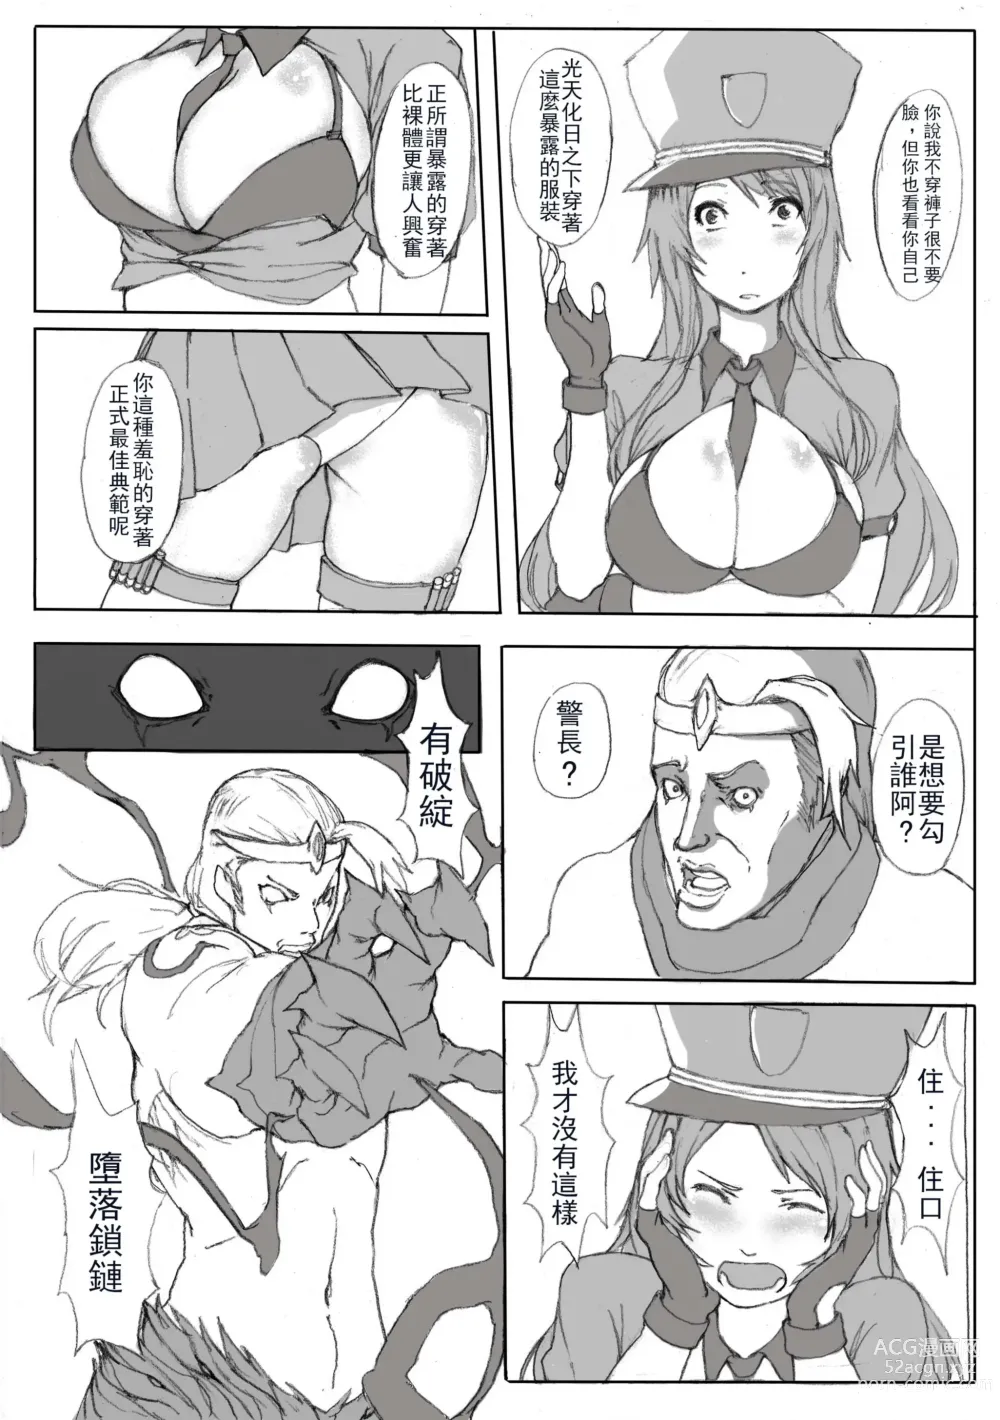 Page 3 of doujinshi 凱特琳壞壞 (League of Legends) [無修正]中文